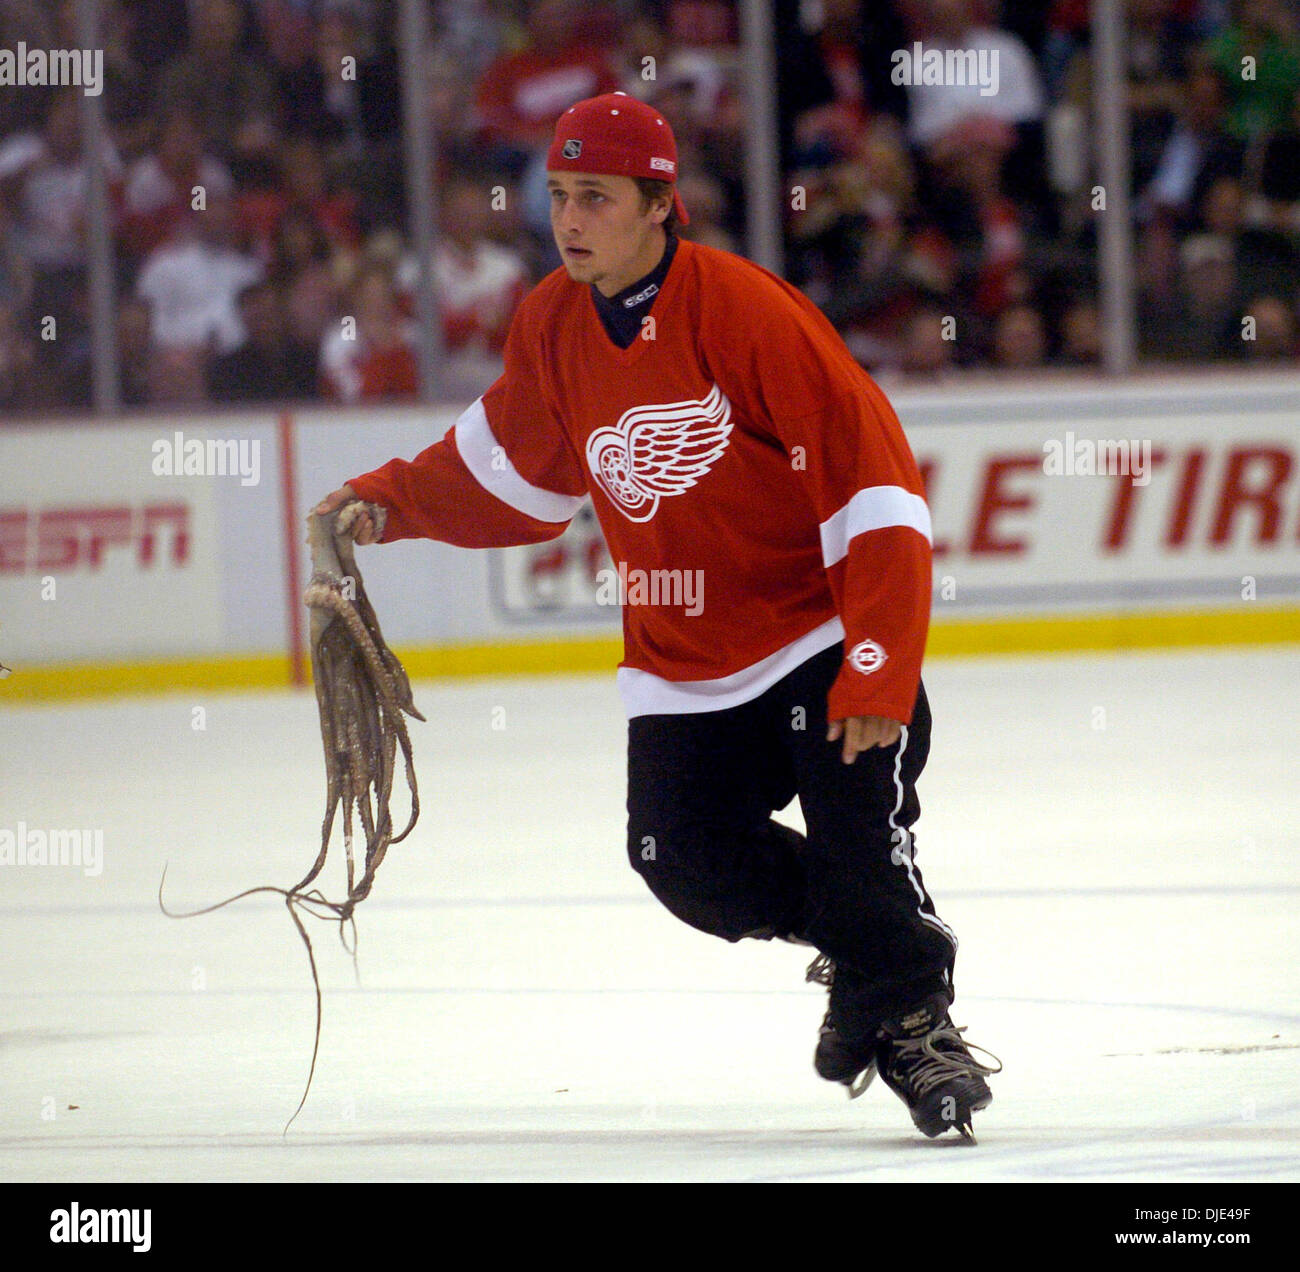 Before Al the Octopus ruled Hockeytown, there was the Red Winger